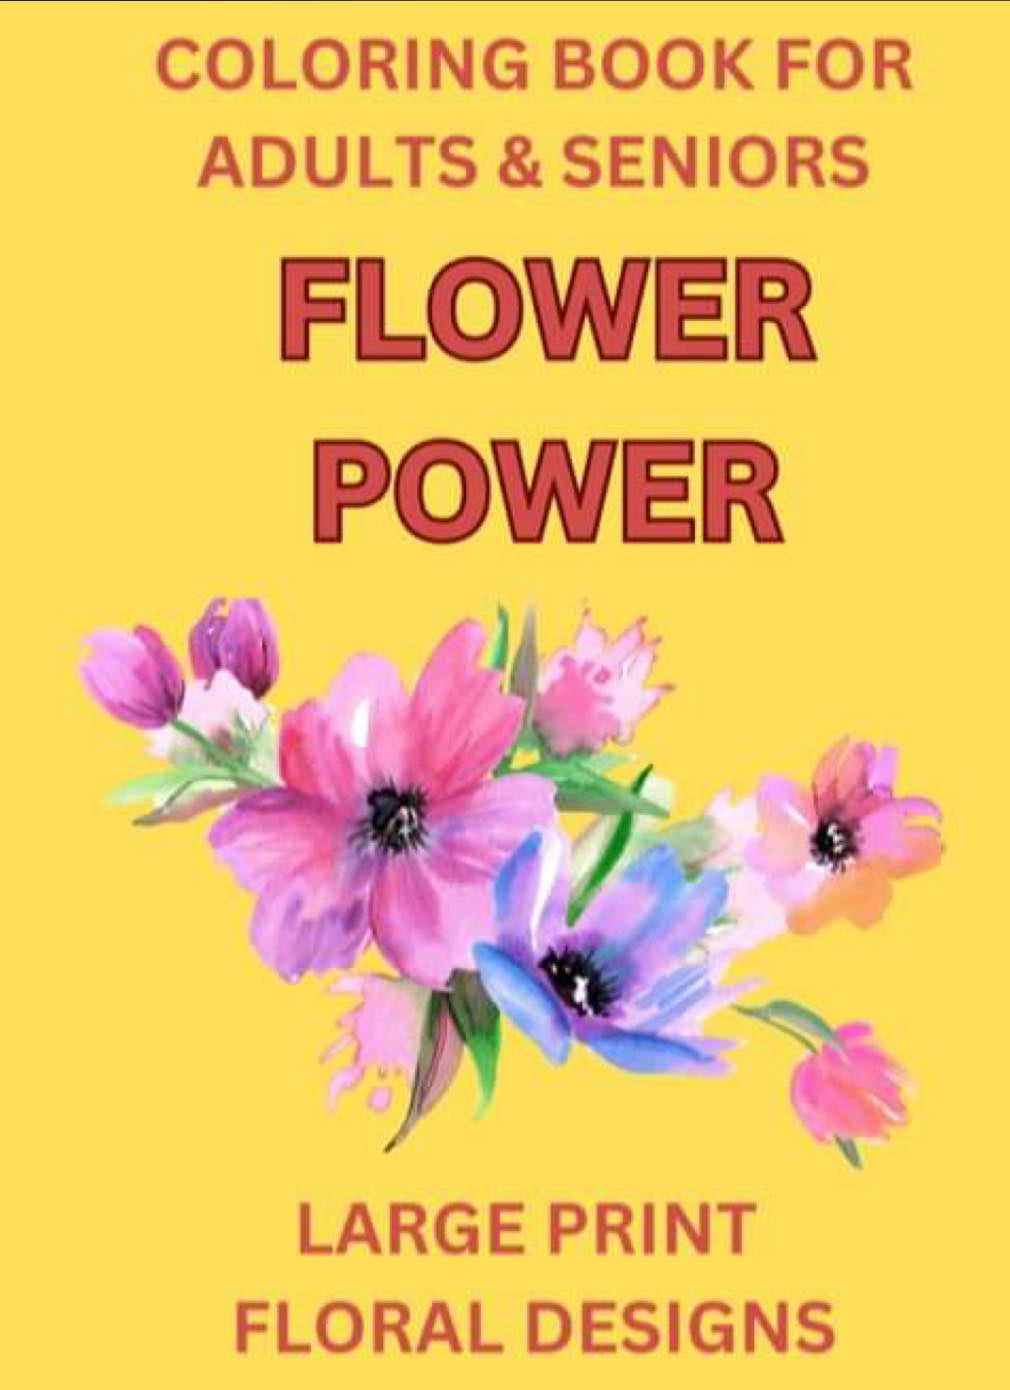 Flower Power Large Print Coloring Book for Adults & Seniors